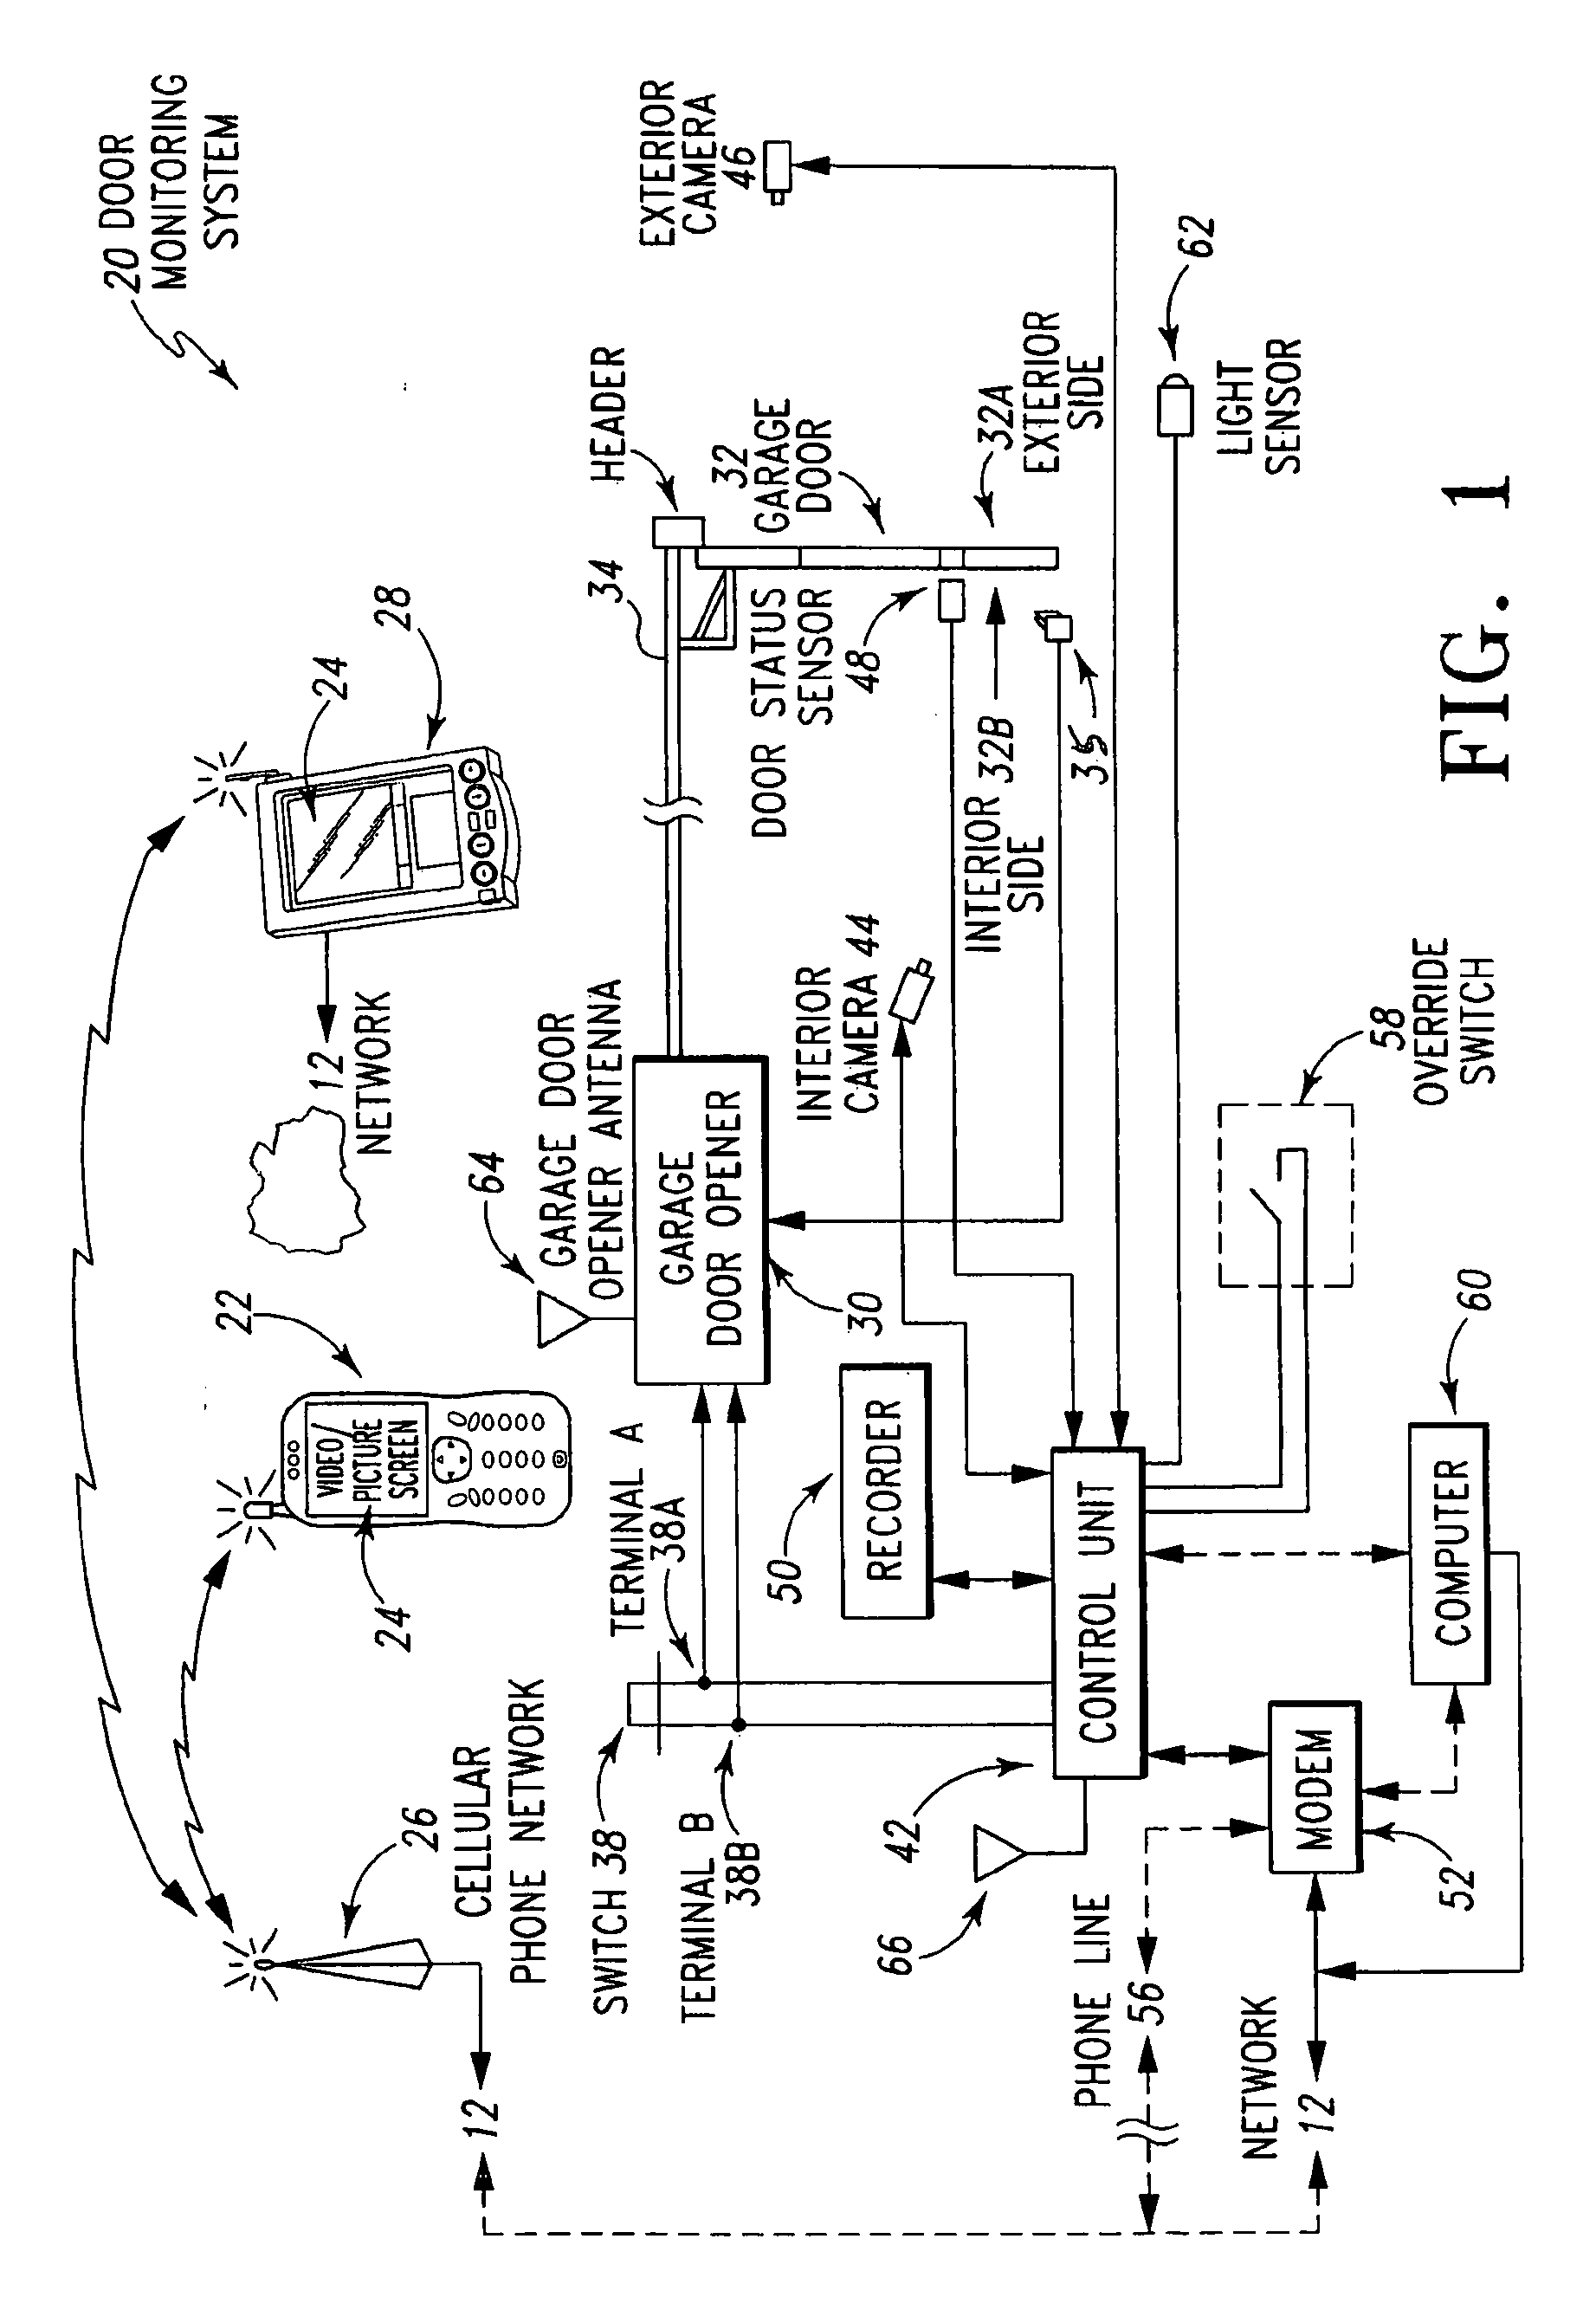 Process, system, method and apparatus for monitoring status and control of equipment